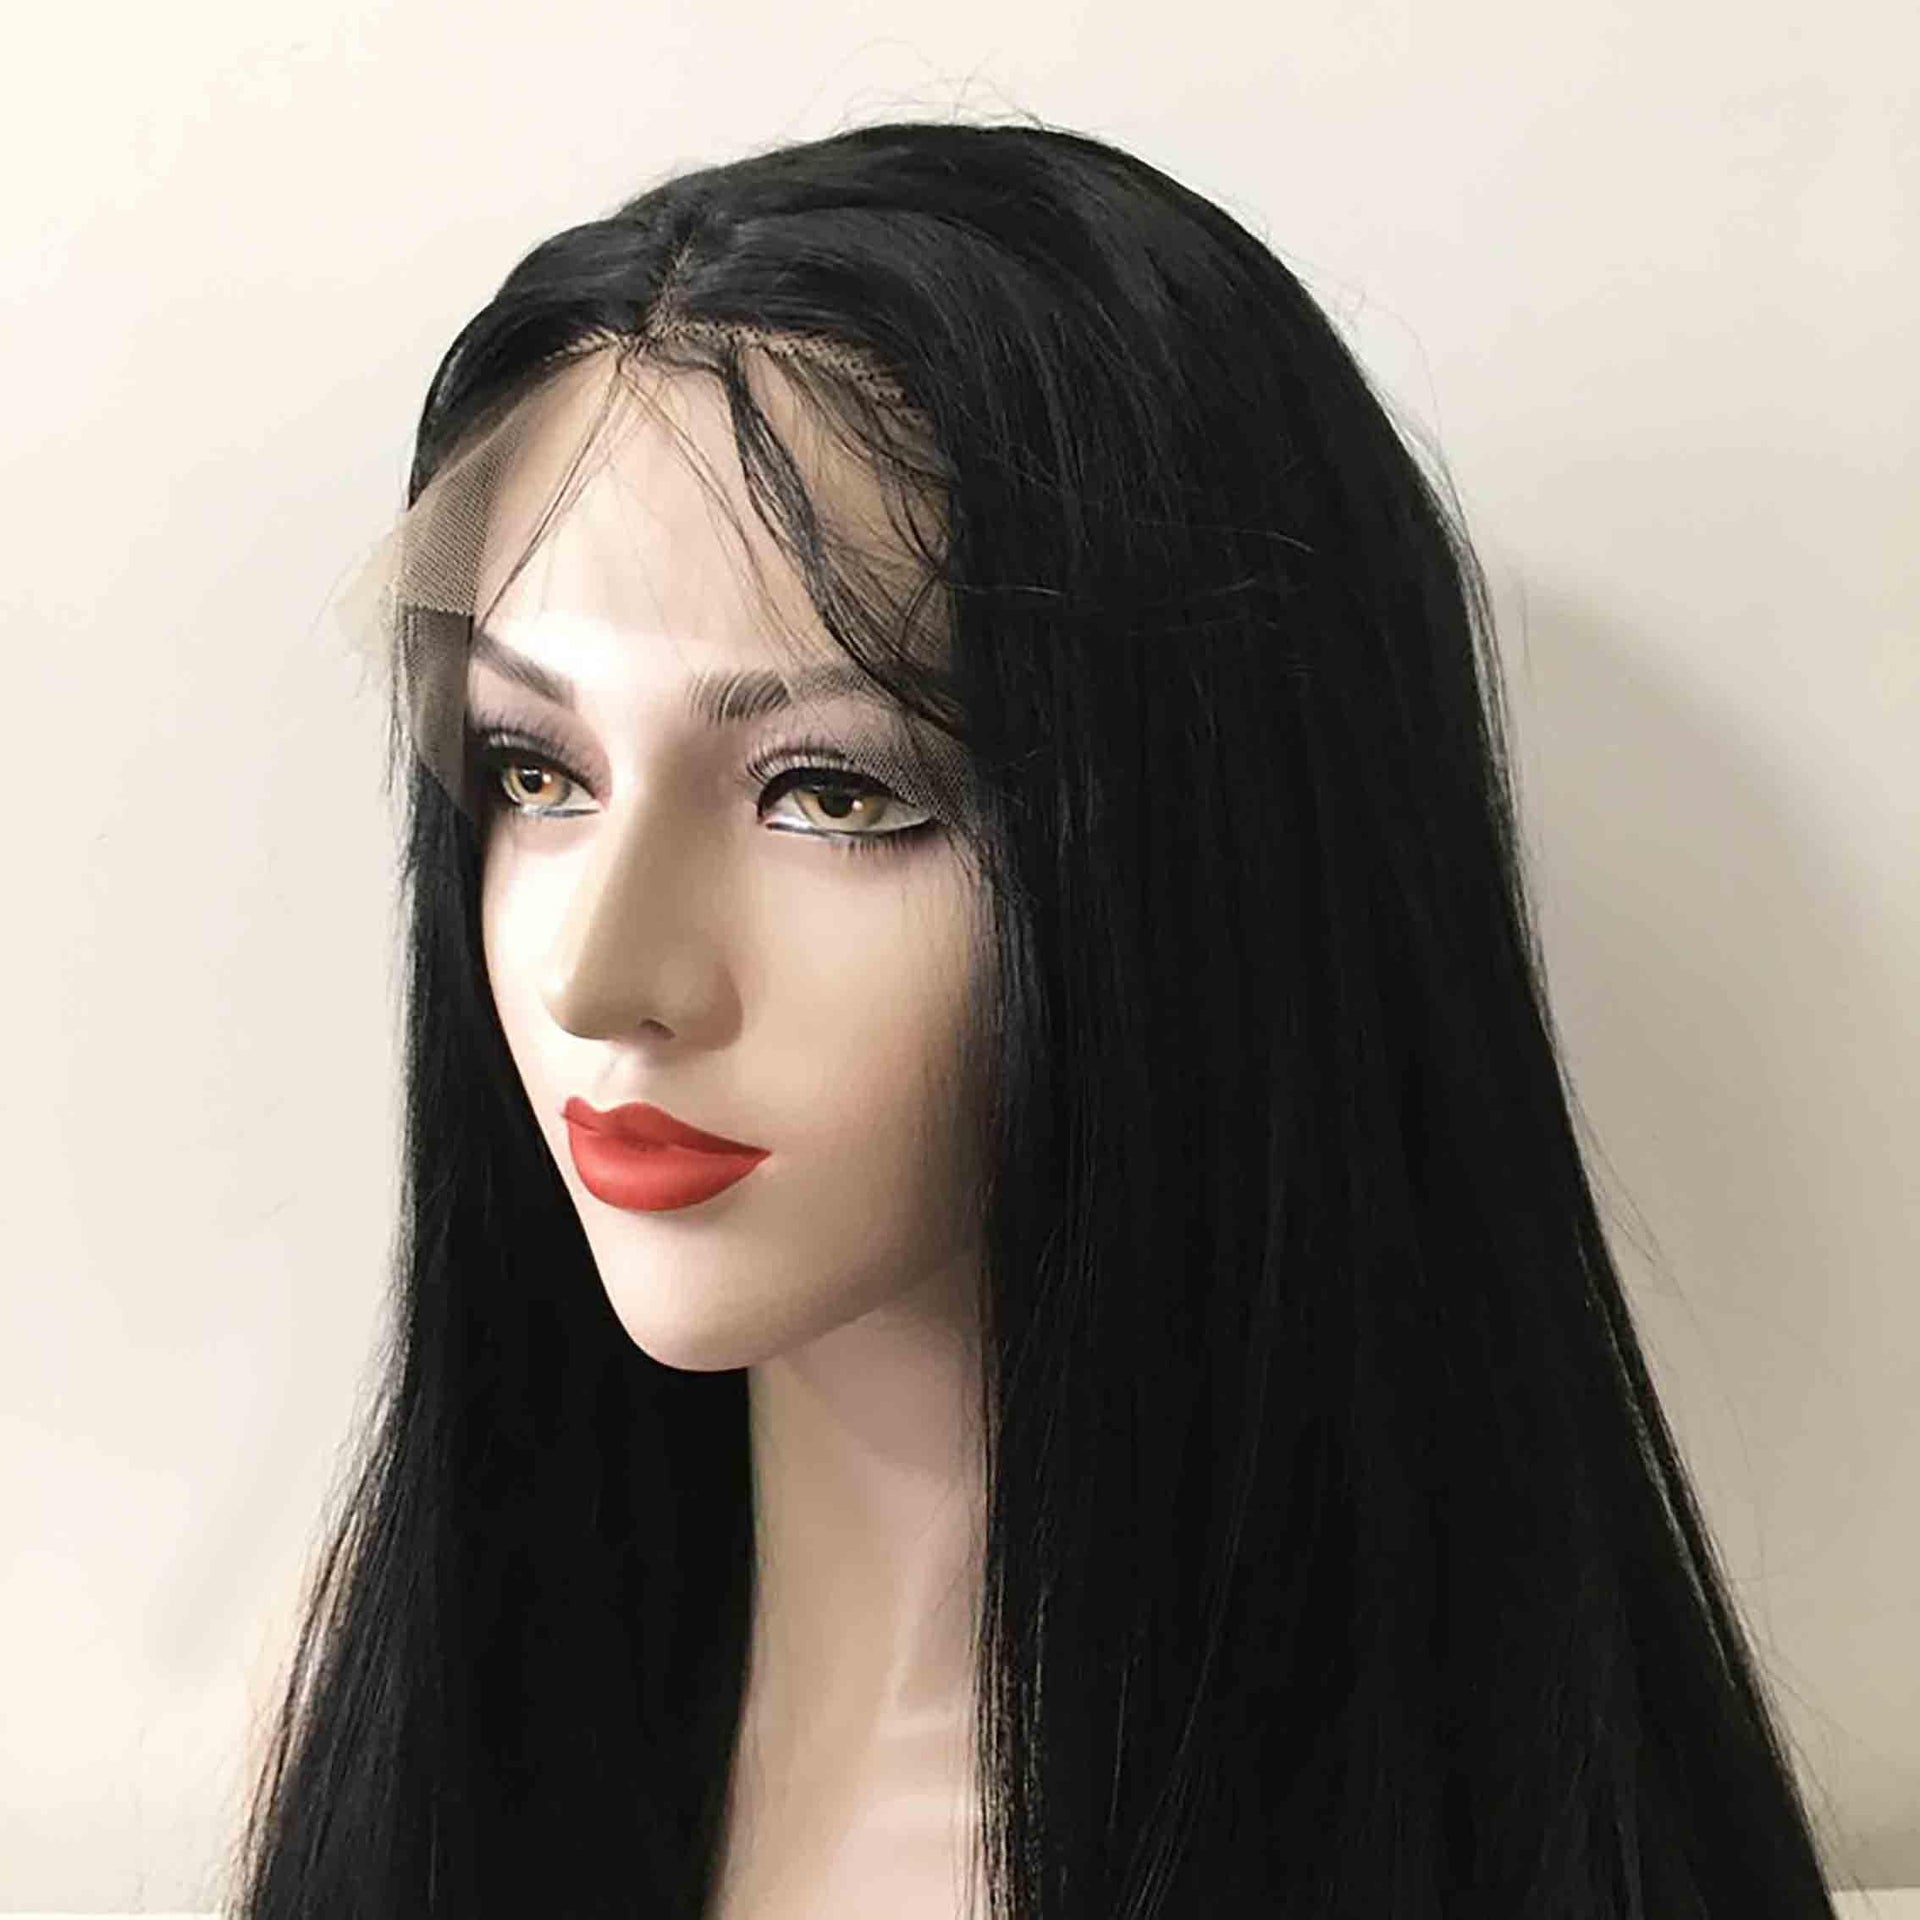 nevermindyrhead Women Black Lace Front Long Straight Pre-plucked Middle Part Wig